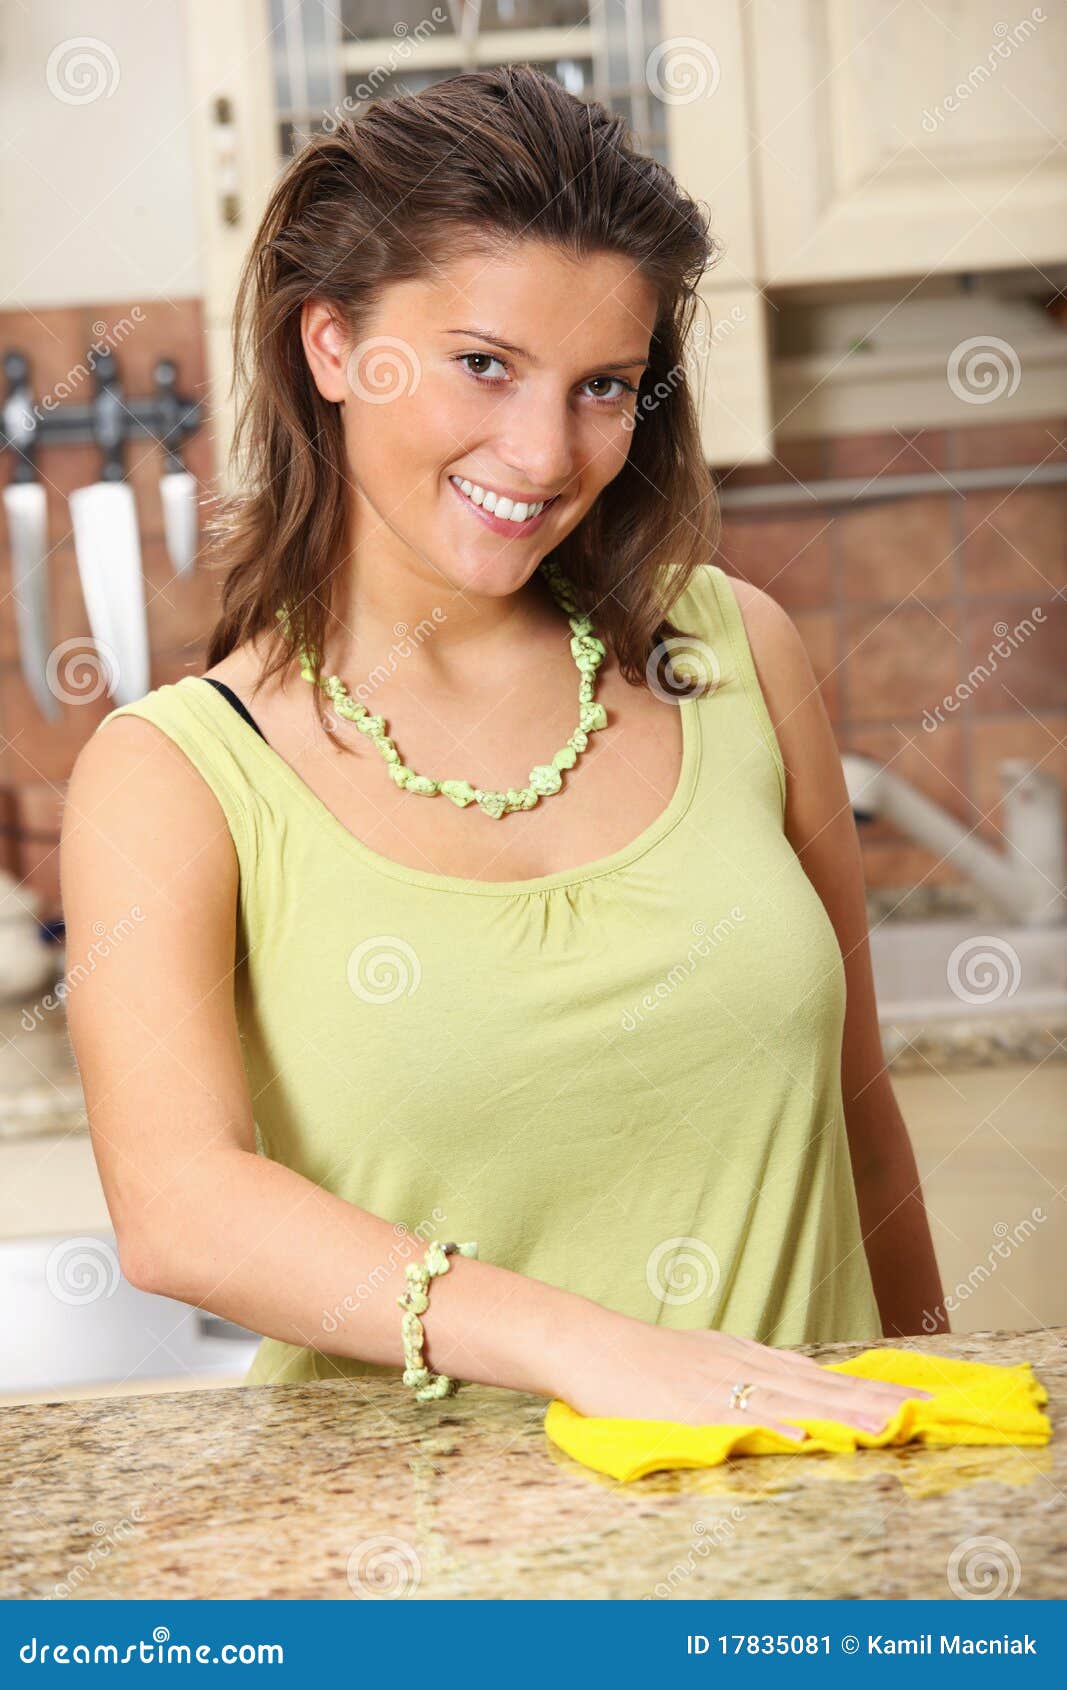 Young Wife Cleaning the Kitchen Stock Image - Image of surface, working